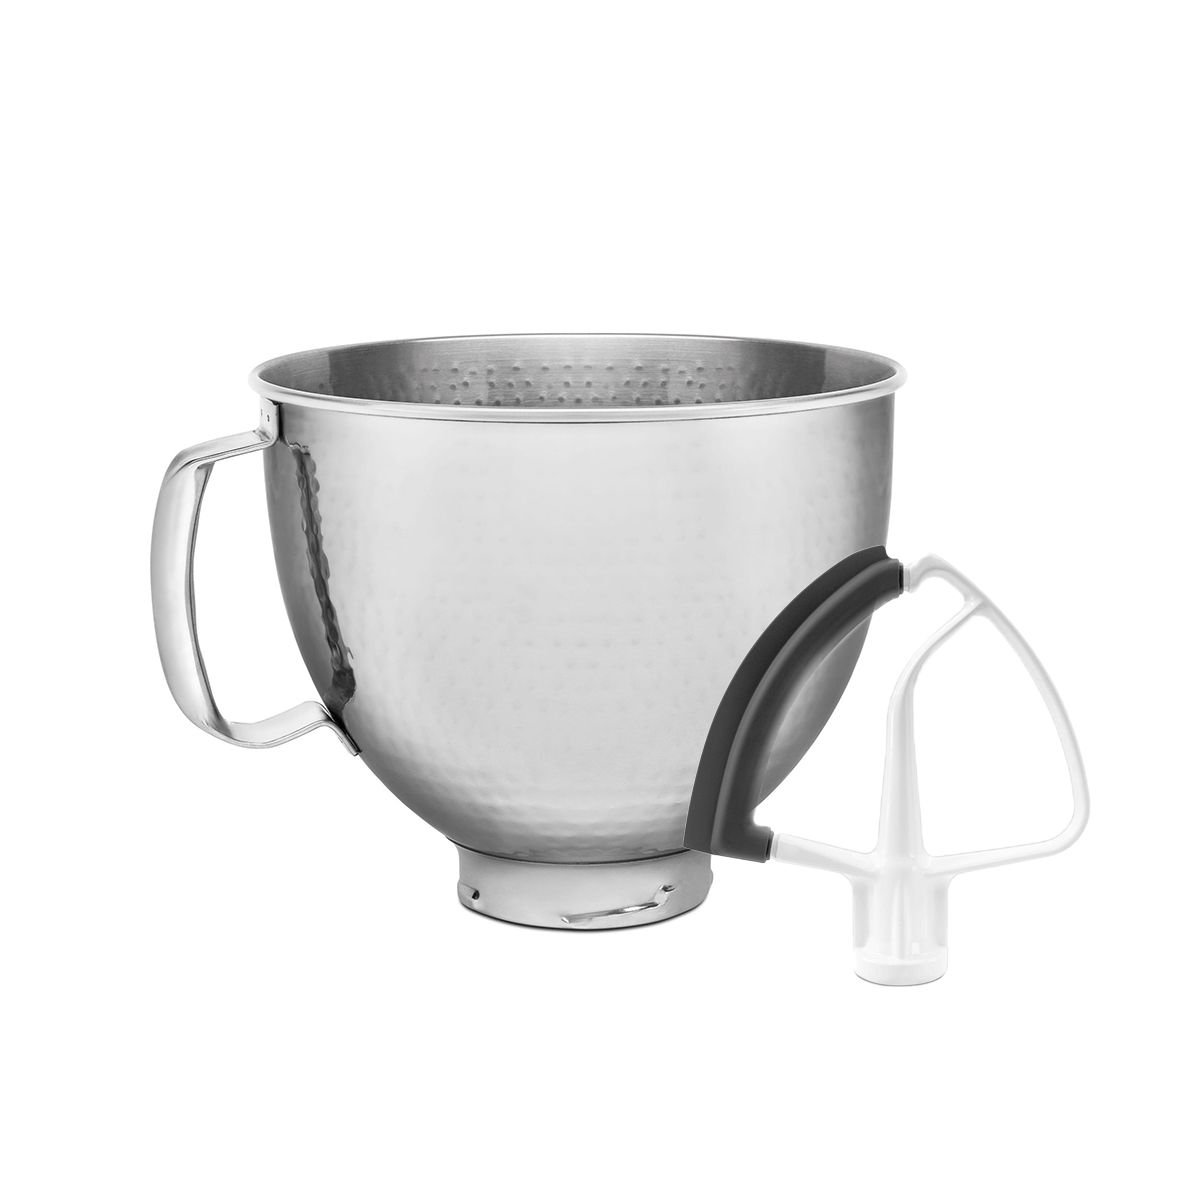 KitchenAid KSM150 Stainless Steel Mixer Mixing Bowl with Handle 5